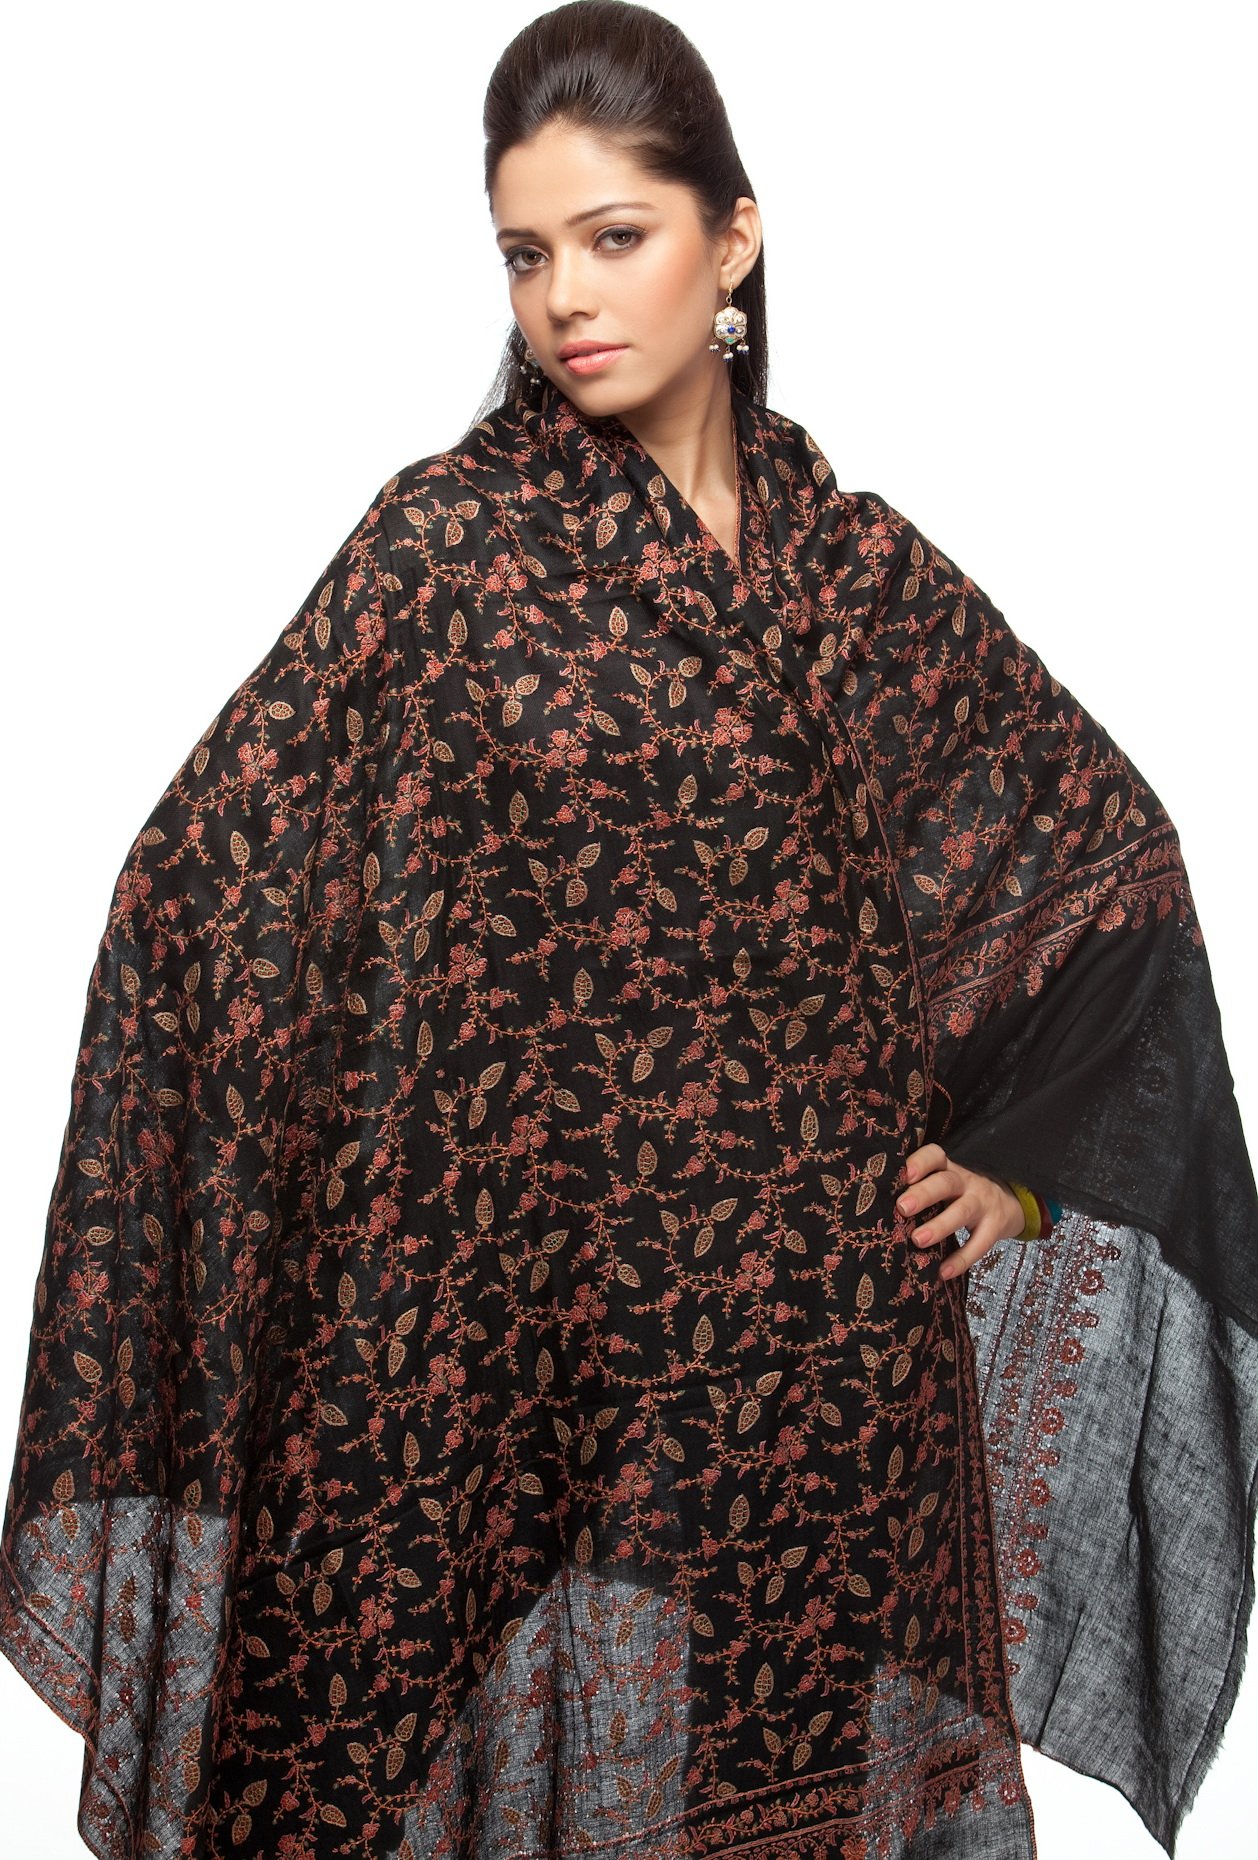 Black Pure Pashmina Shawl with Intricate Kashmiri Sozni Embroidery by Hand  All-Over | Exotic India Art